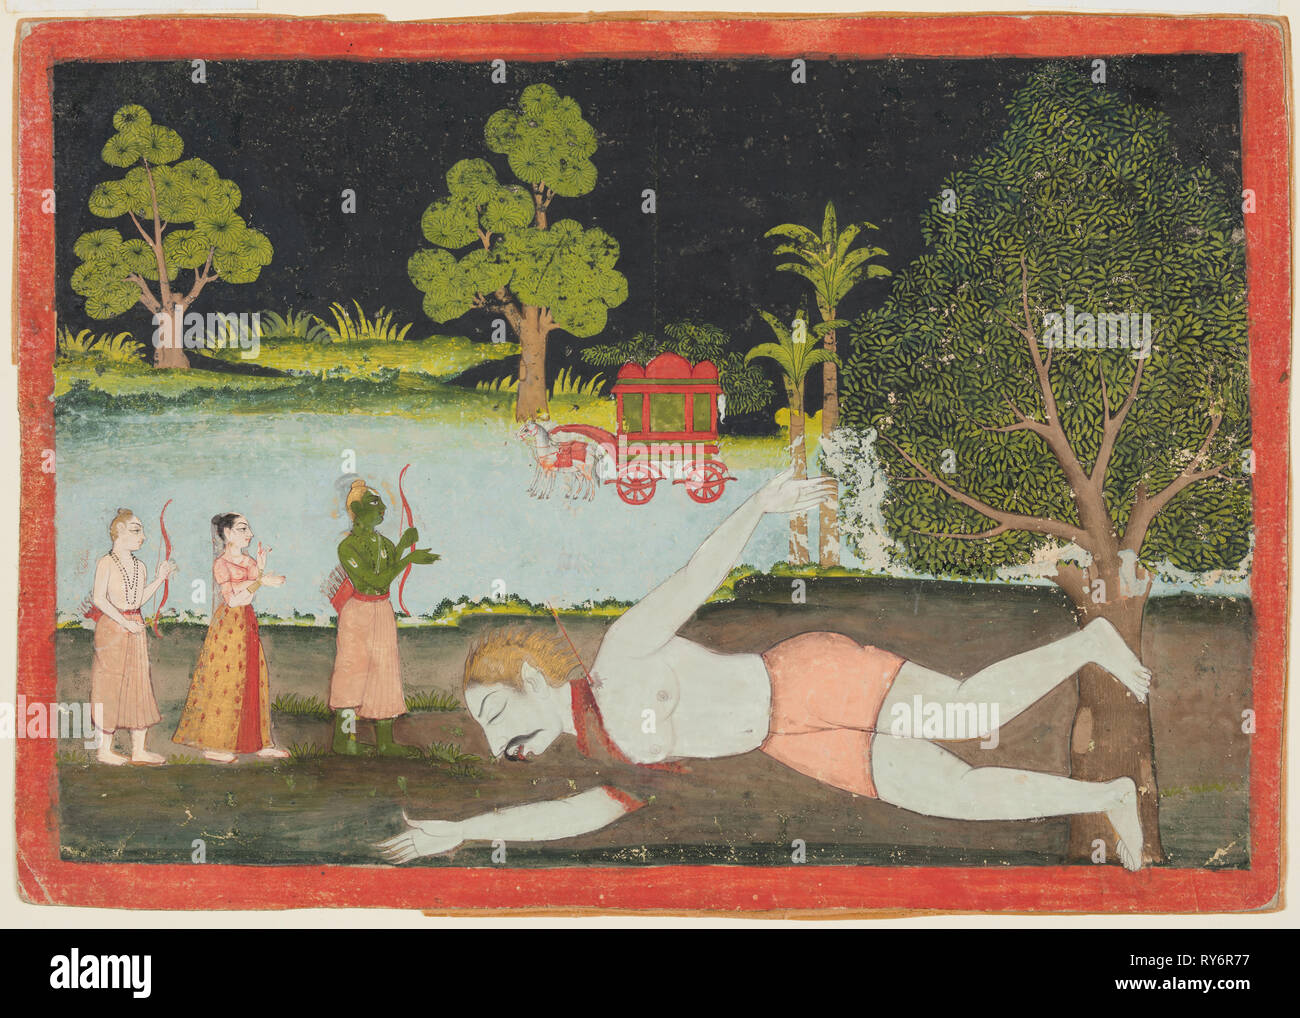 A page from a Ramayana: Rama, Lakshman and Sita before a slain giant, c. 1770. India, Datia. Color on paper; page: 21 x 29.8 cm (8 1/4 x 11 3/4 in.); miniature: 19 x 28 cm (7 1/2 x 11 in Stock Photo